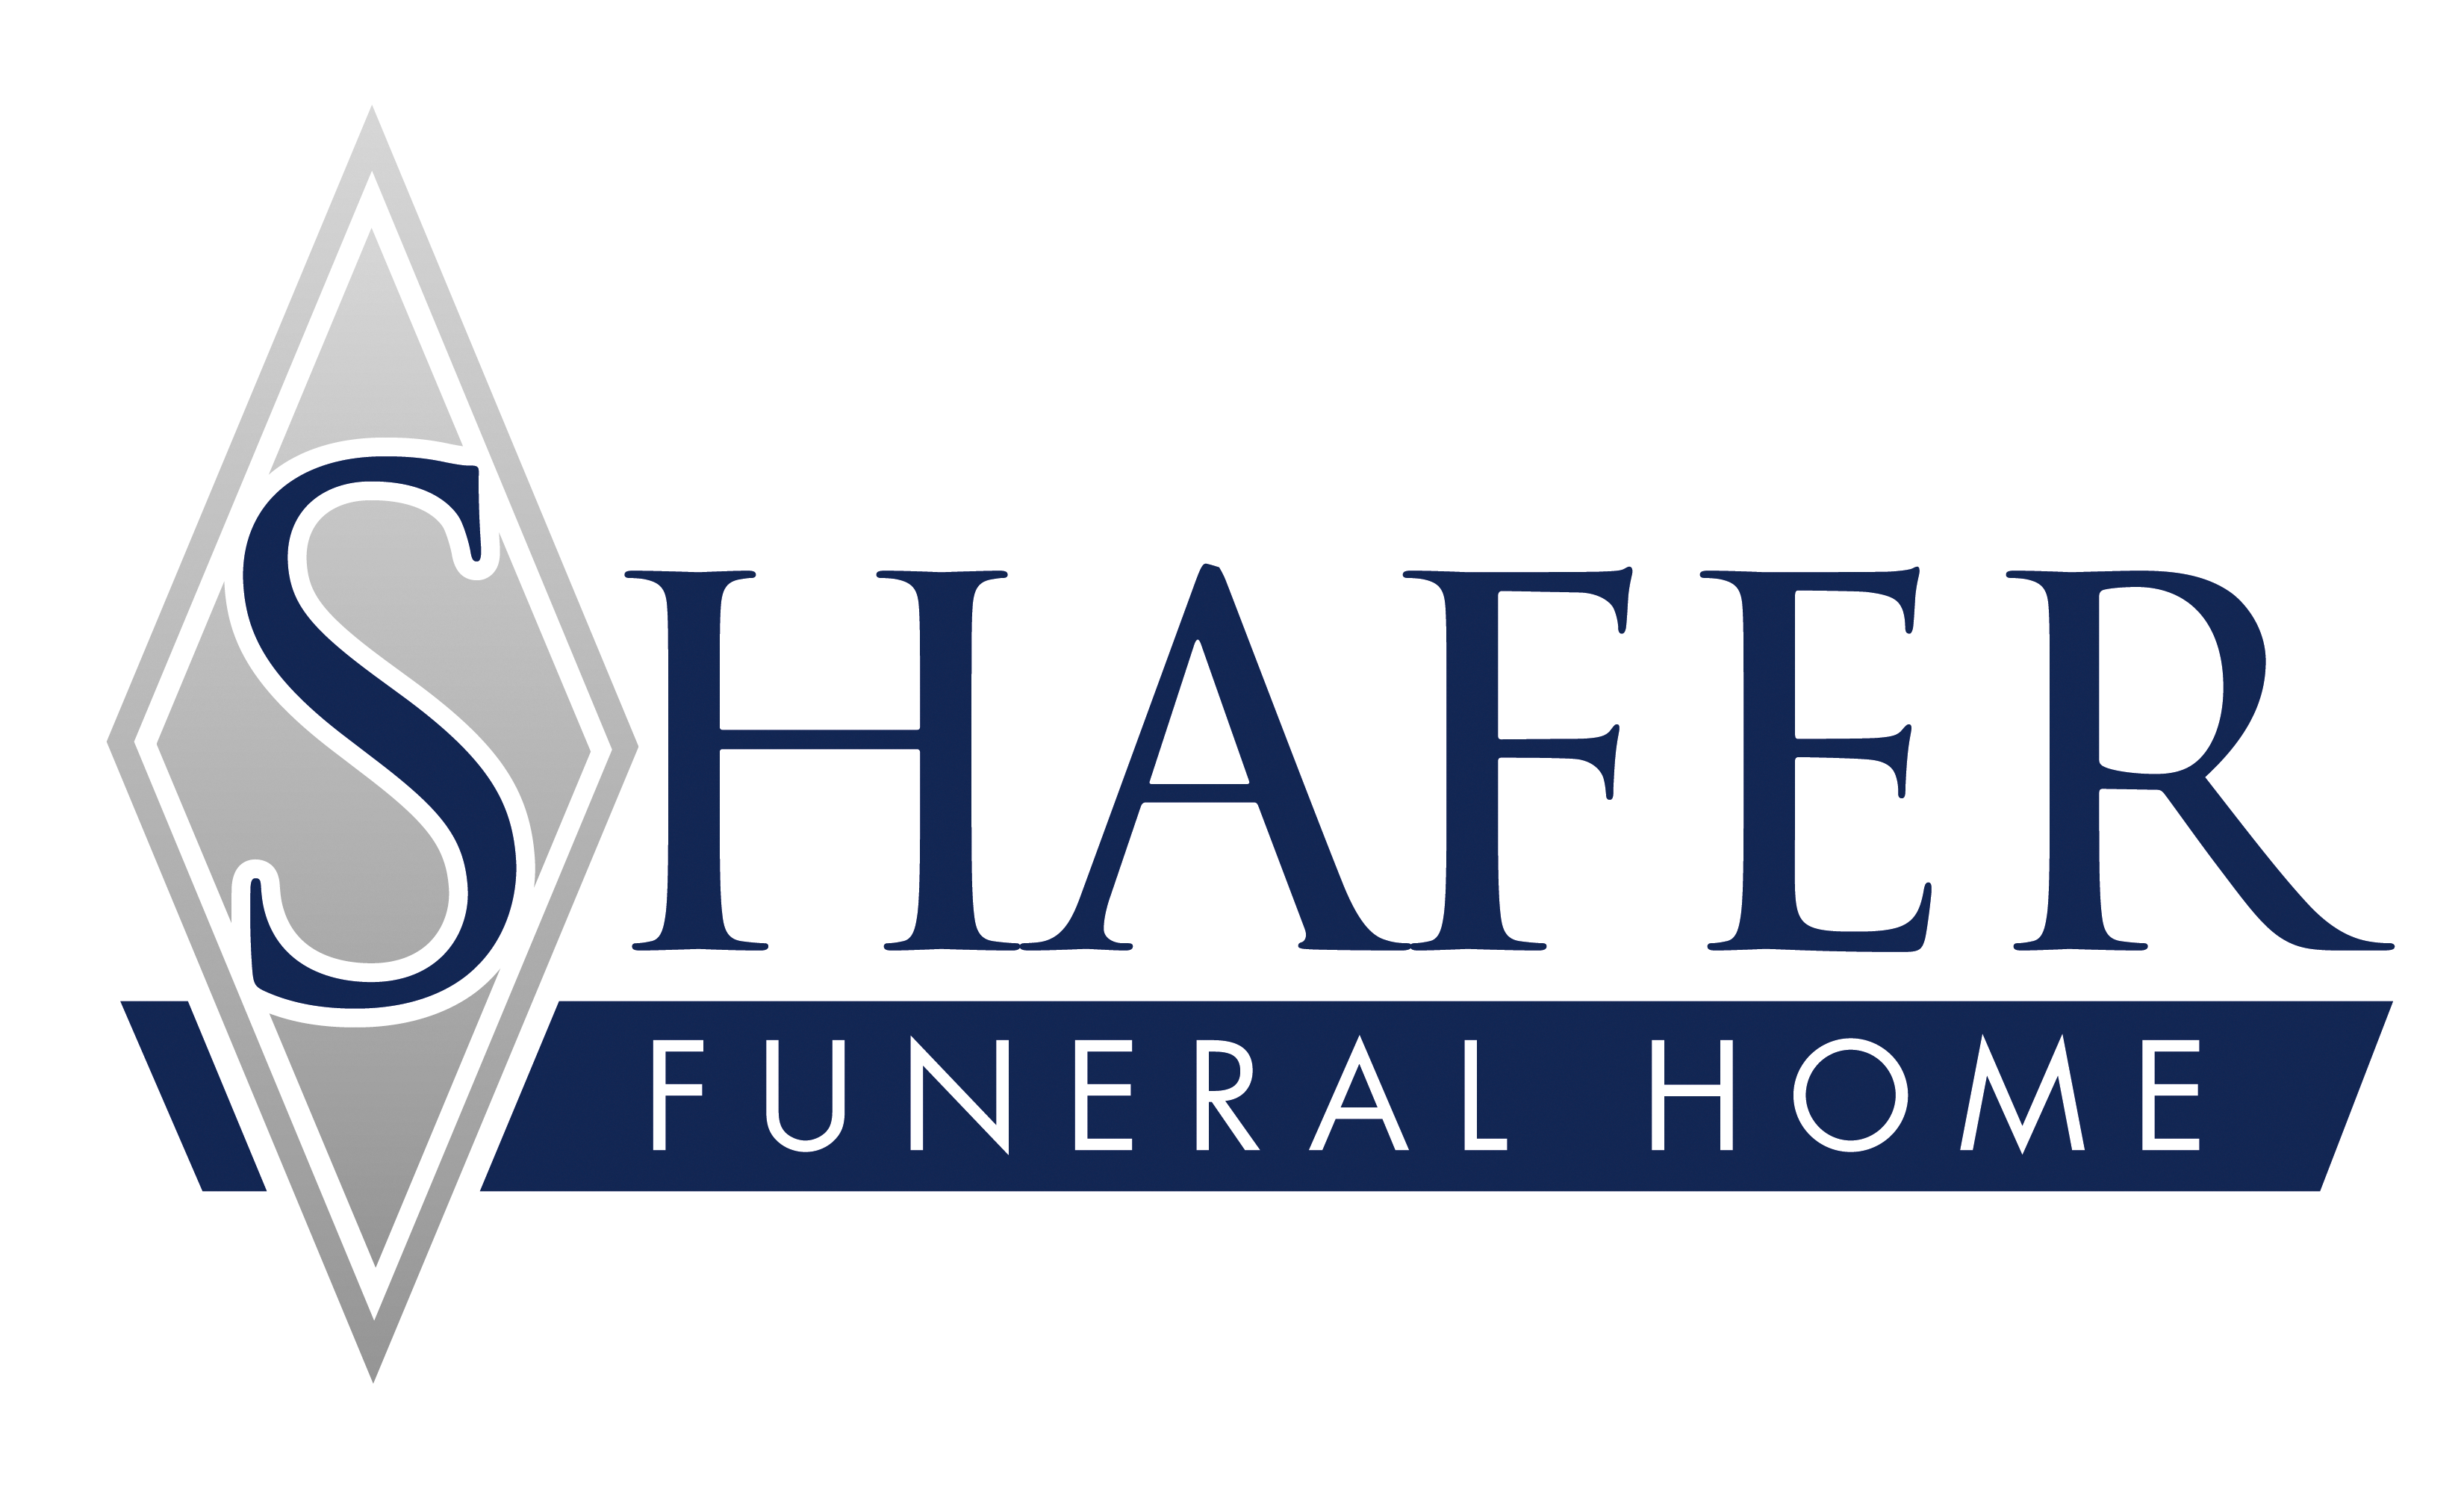 C. (Event Day) Shafer Funeral Home